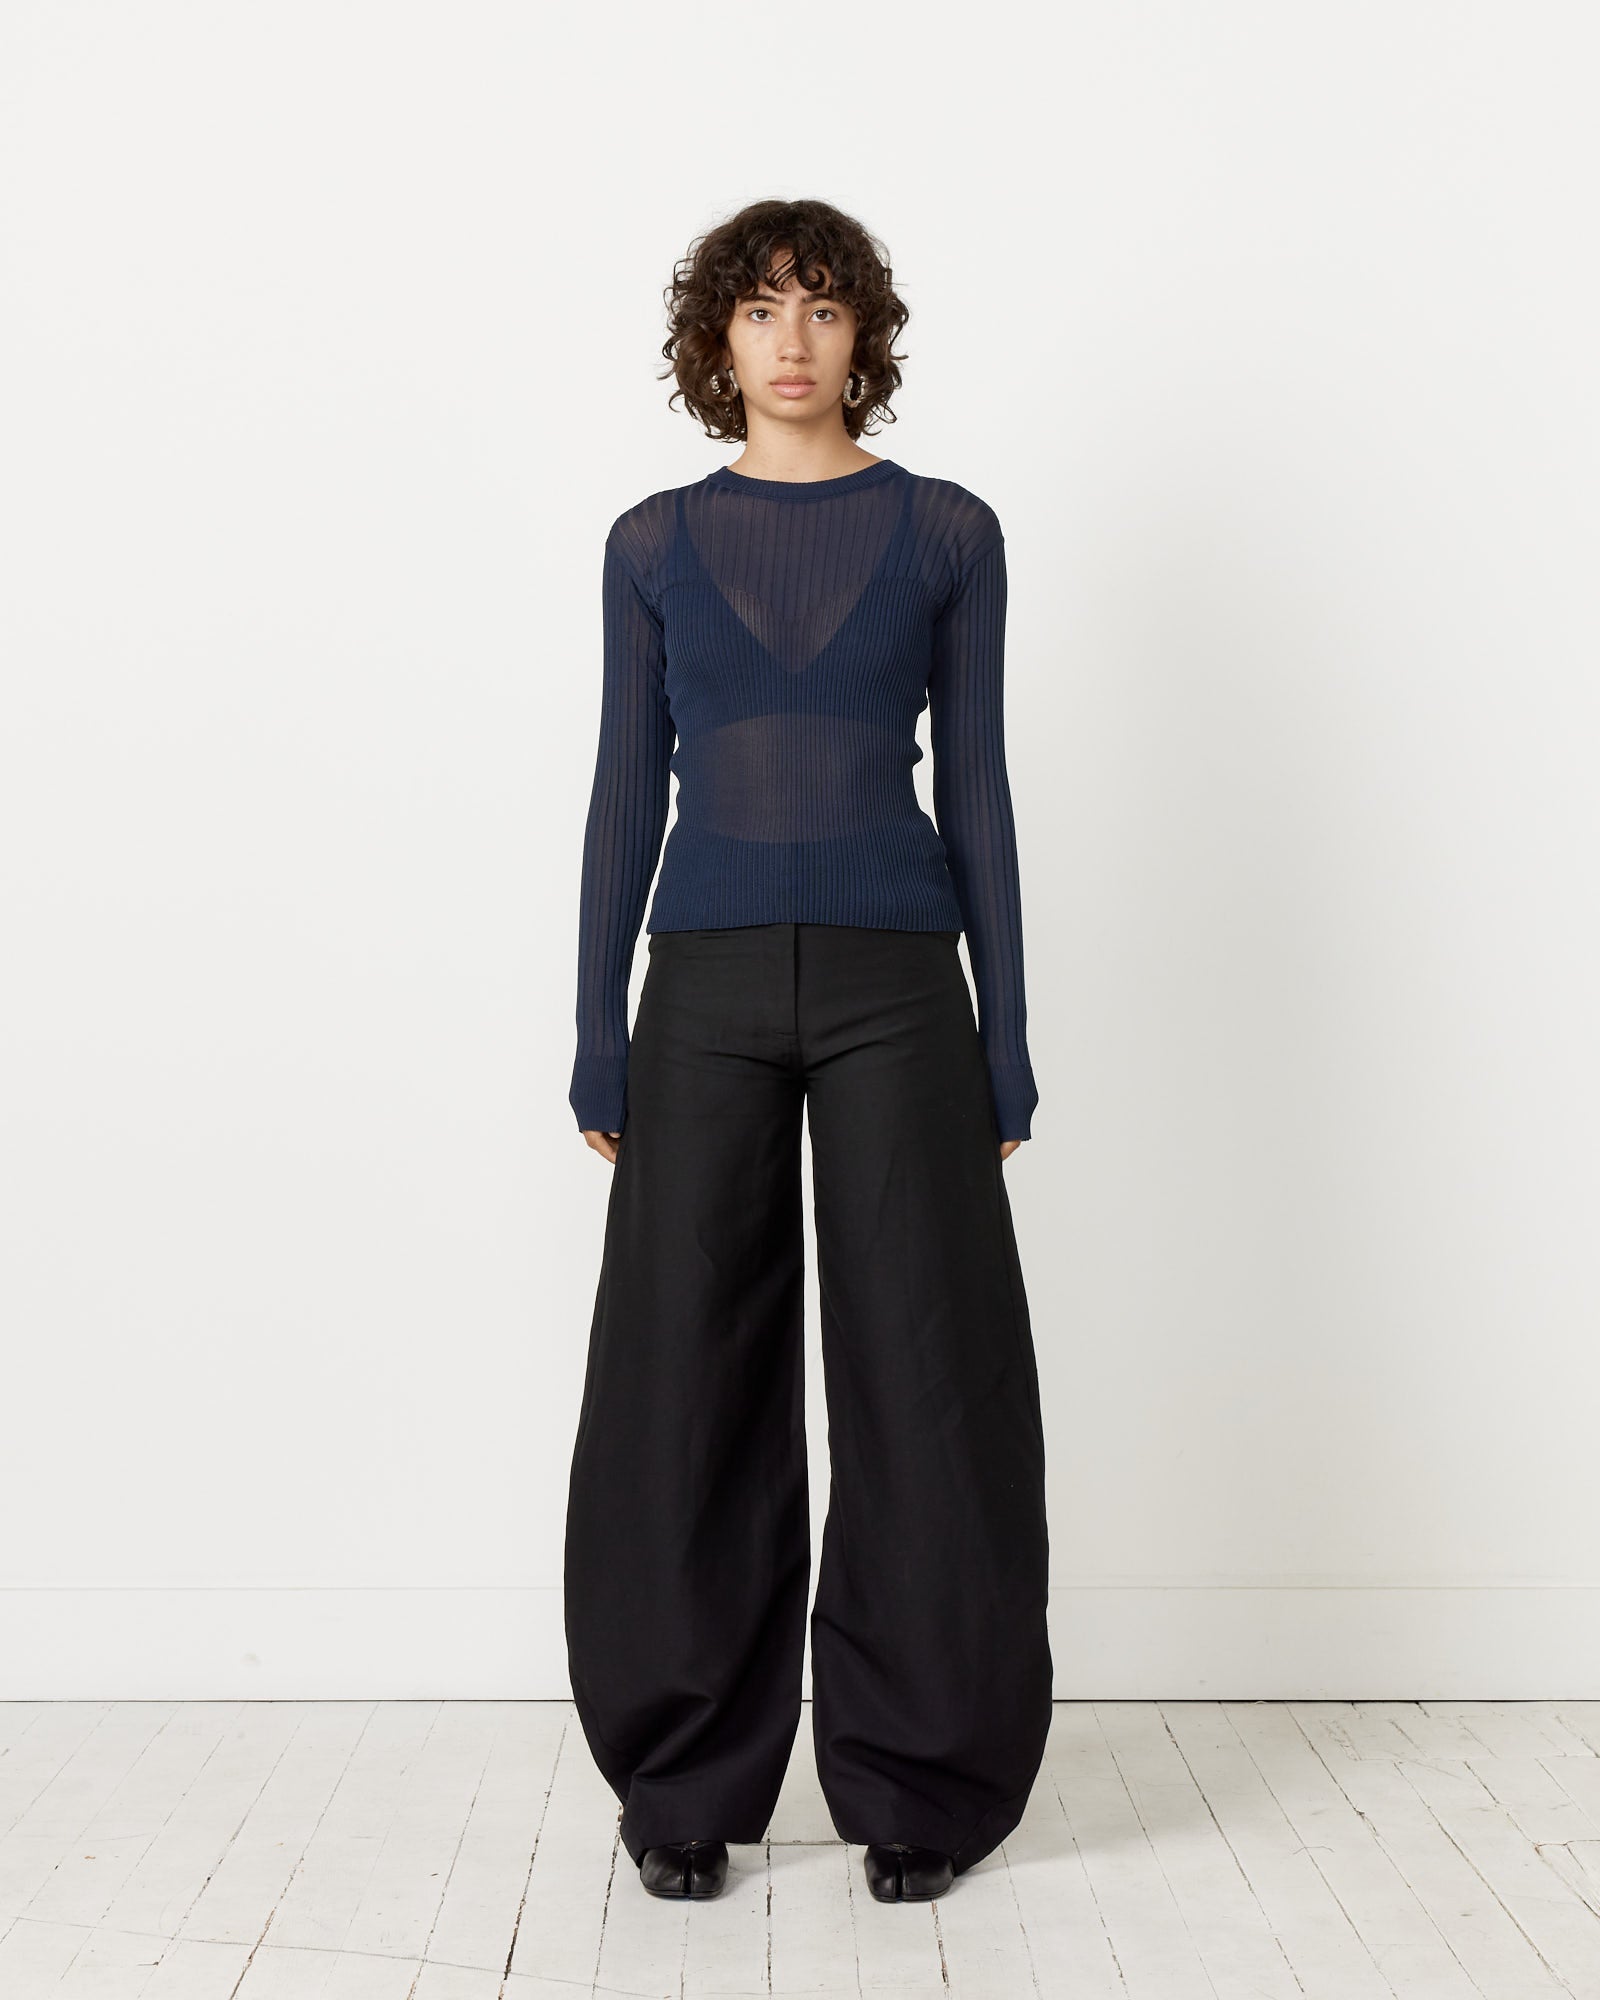 Pipette Pant in Black